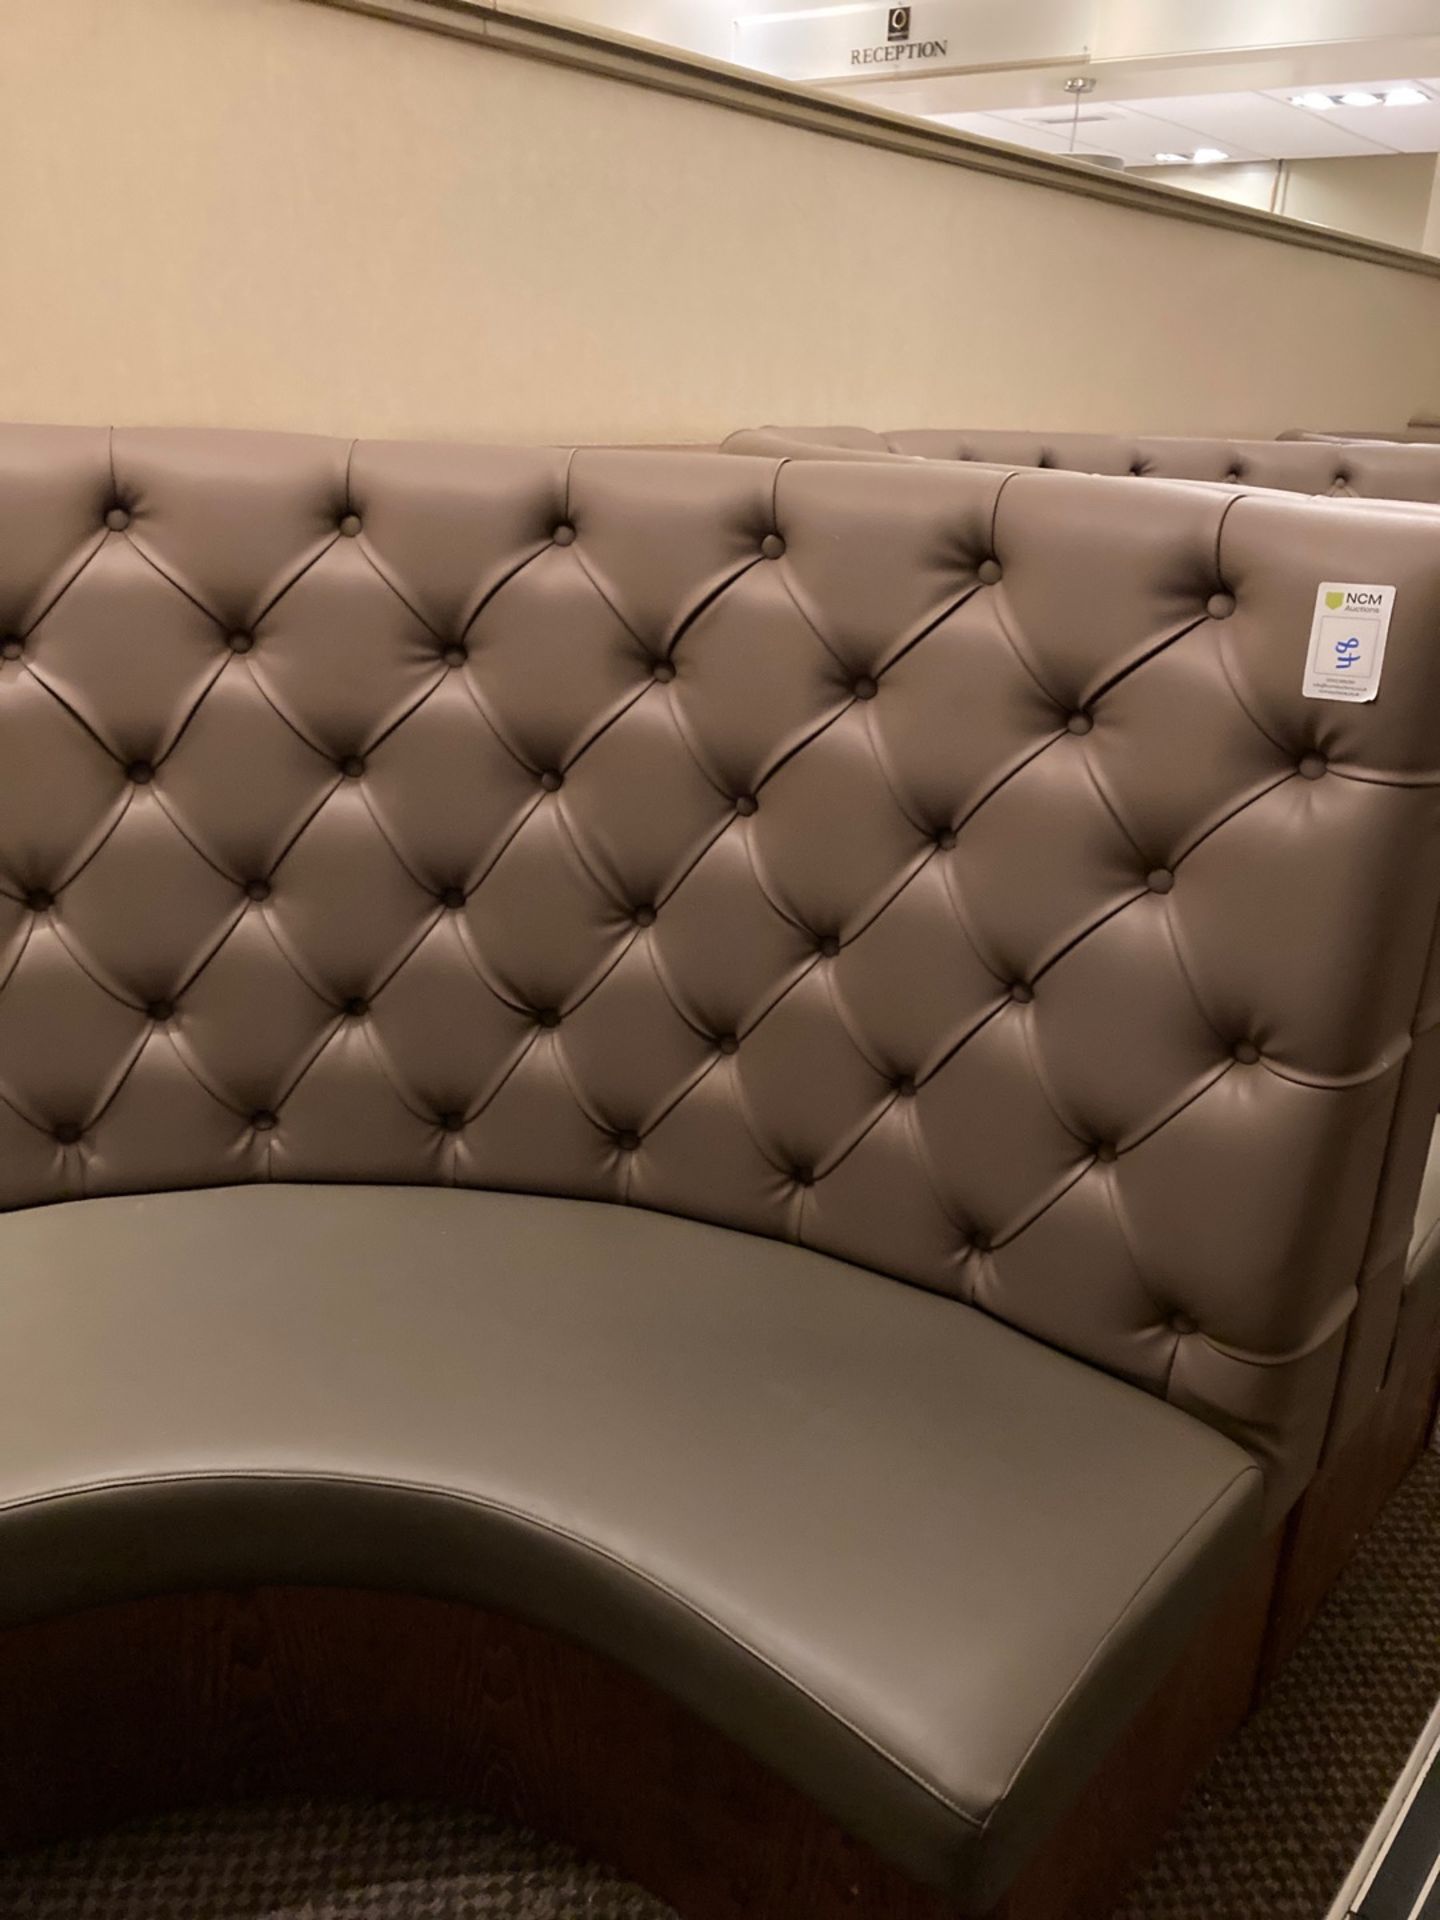 Banquette Seating - Image 3 of 4